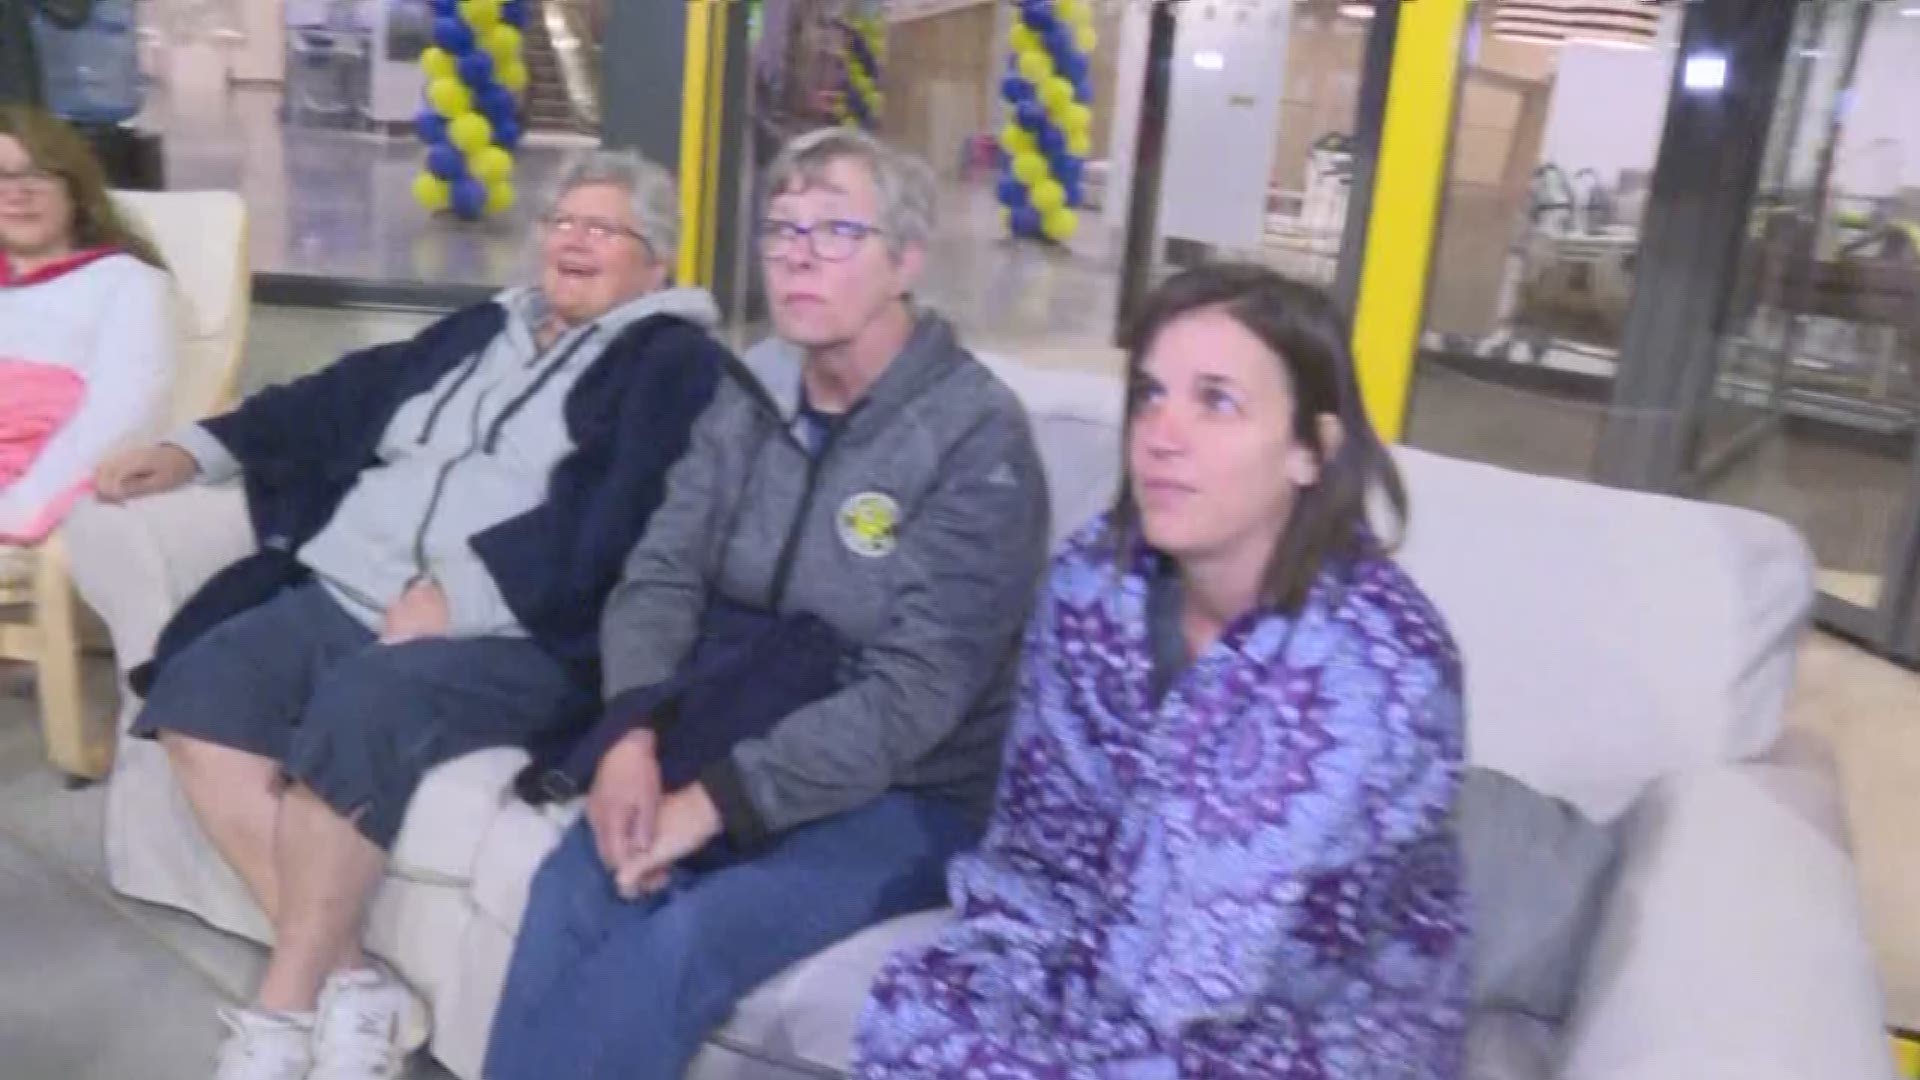 June 7, 2017: More than 140 people have camped out waiting for the new IKEA store to open in Columbus.